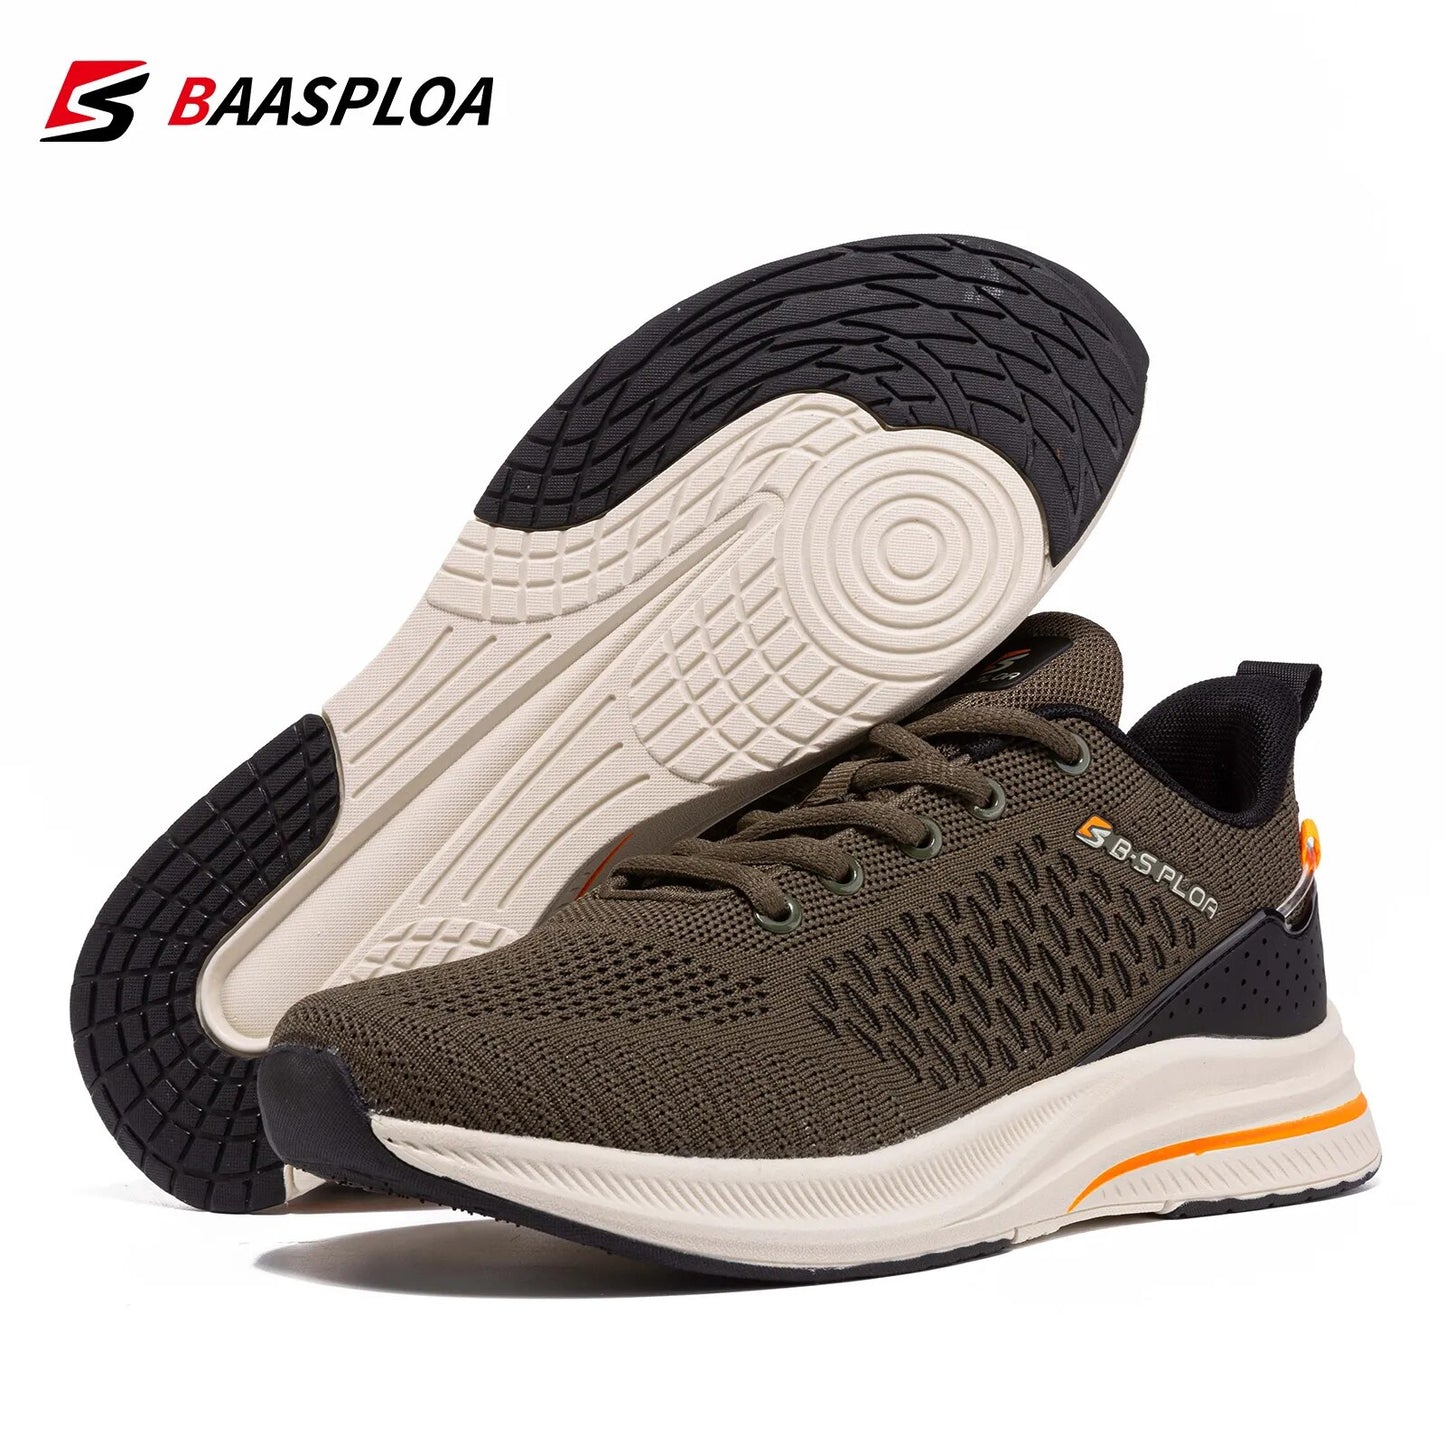 Knit Casual Walking Shoes Breathable Sneakers Light Shock Absorption Male Tennis Shoe - TaMNz